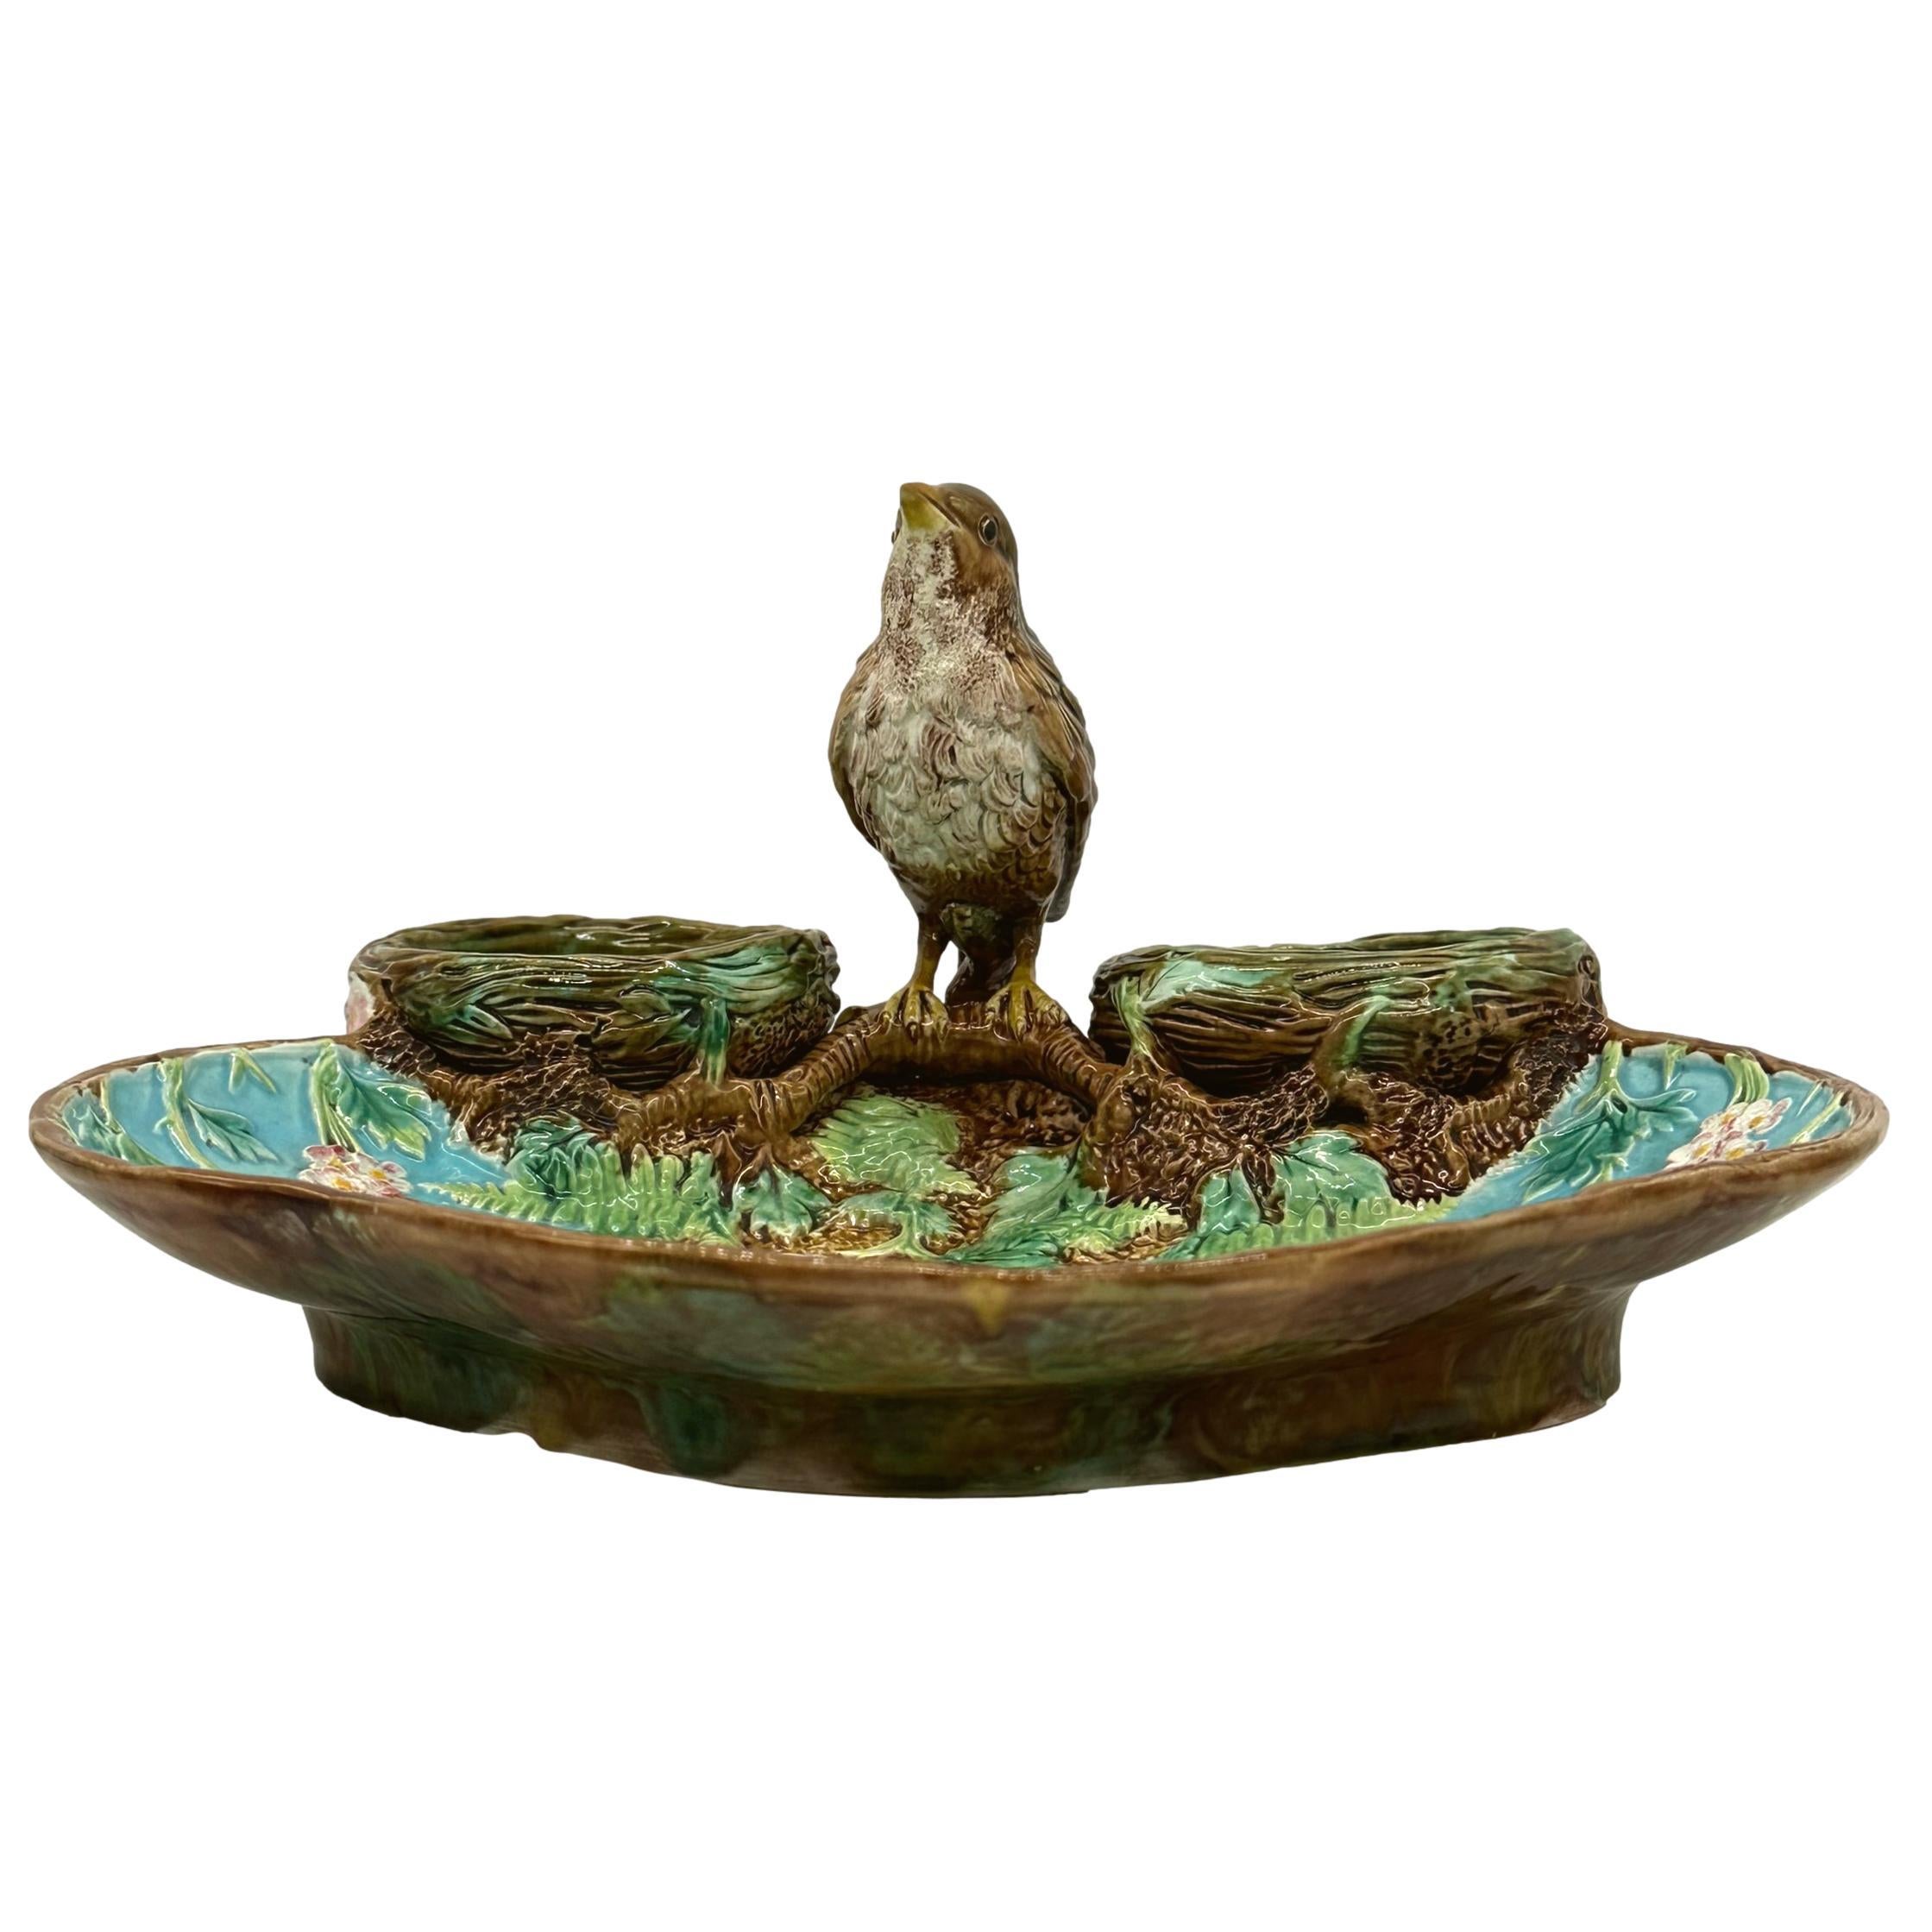 George Jones Majolica Strawberry Server Mounted by a Bird, English, circa 1870 In Good Condition For Sale In Banner Elk, NC